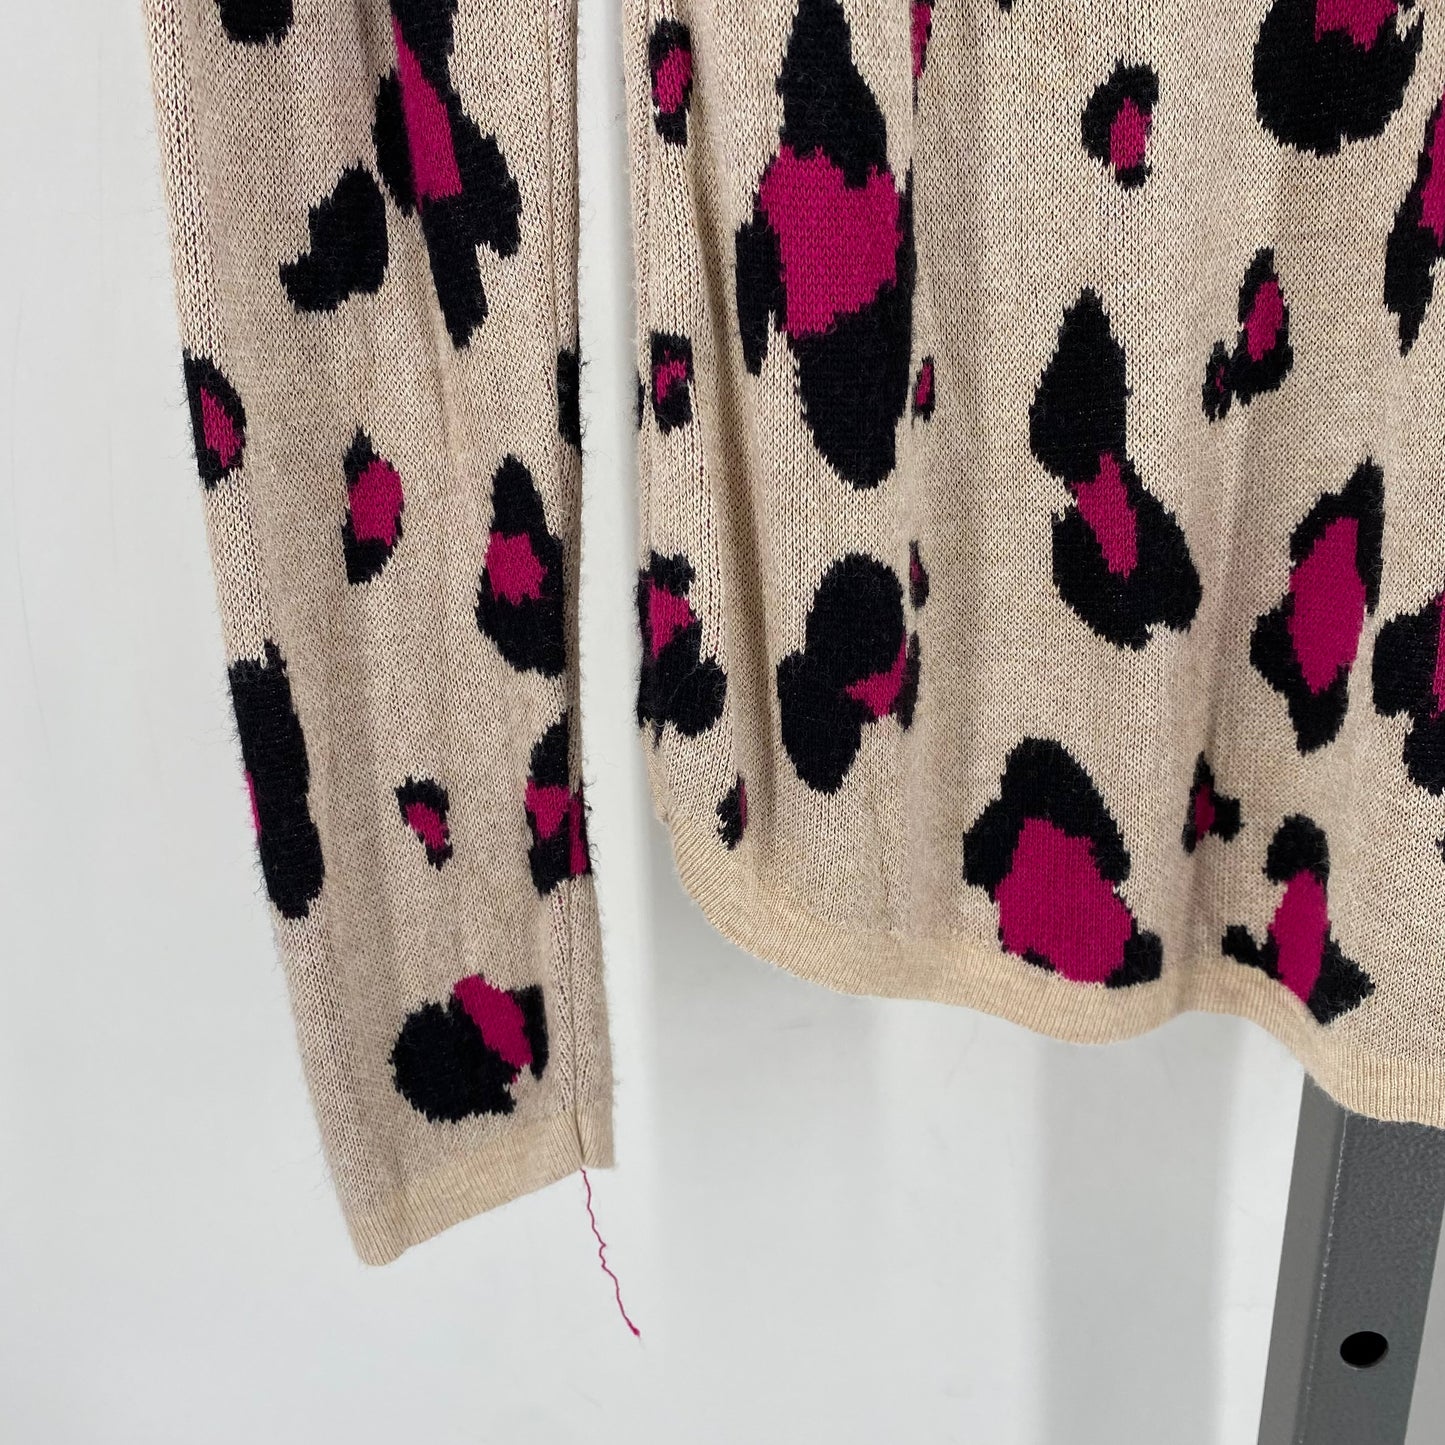 Size 1 CHICO'S Knit LEOPARD Sweater